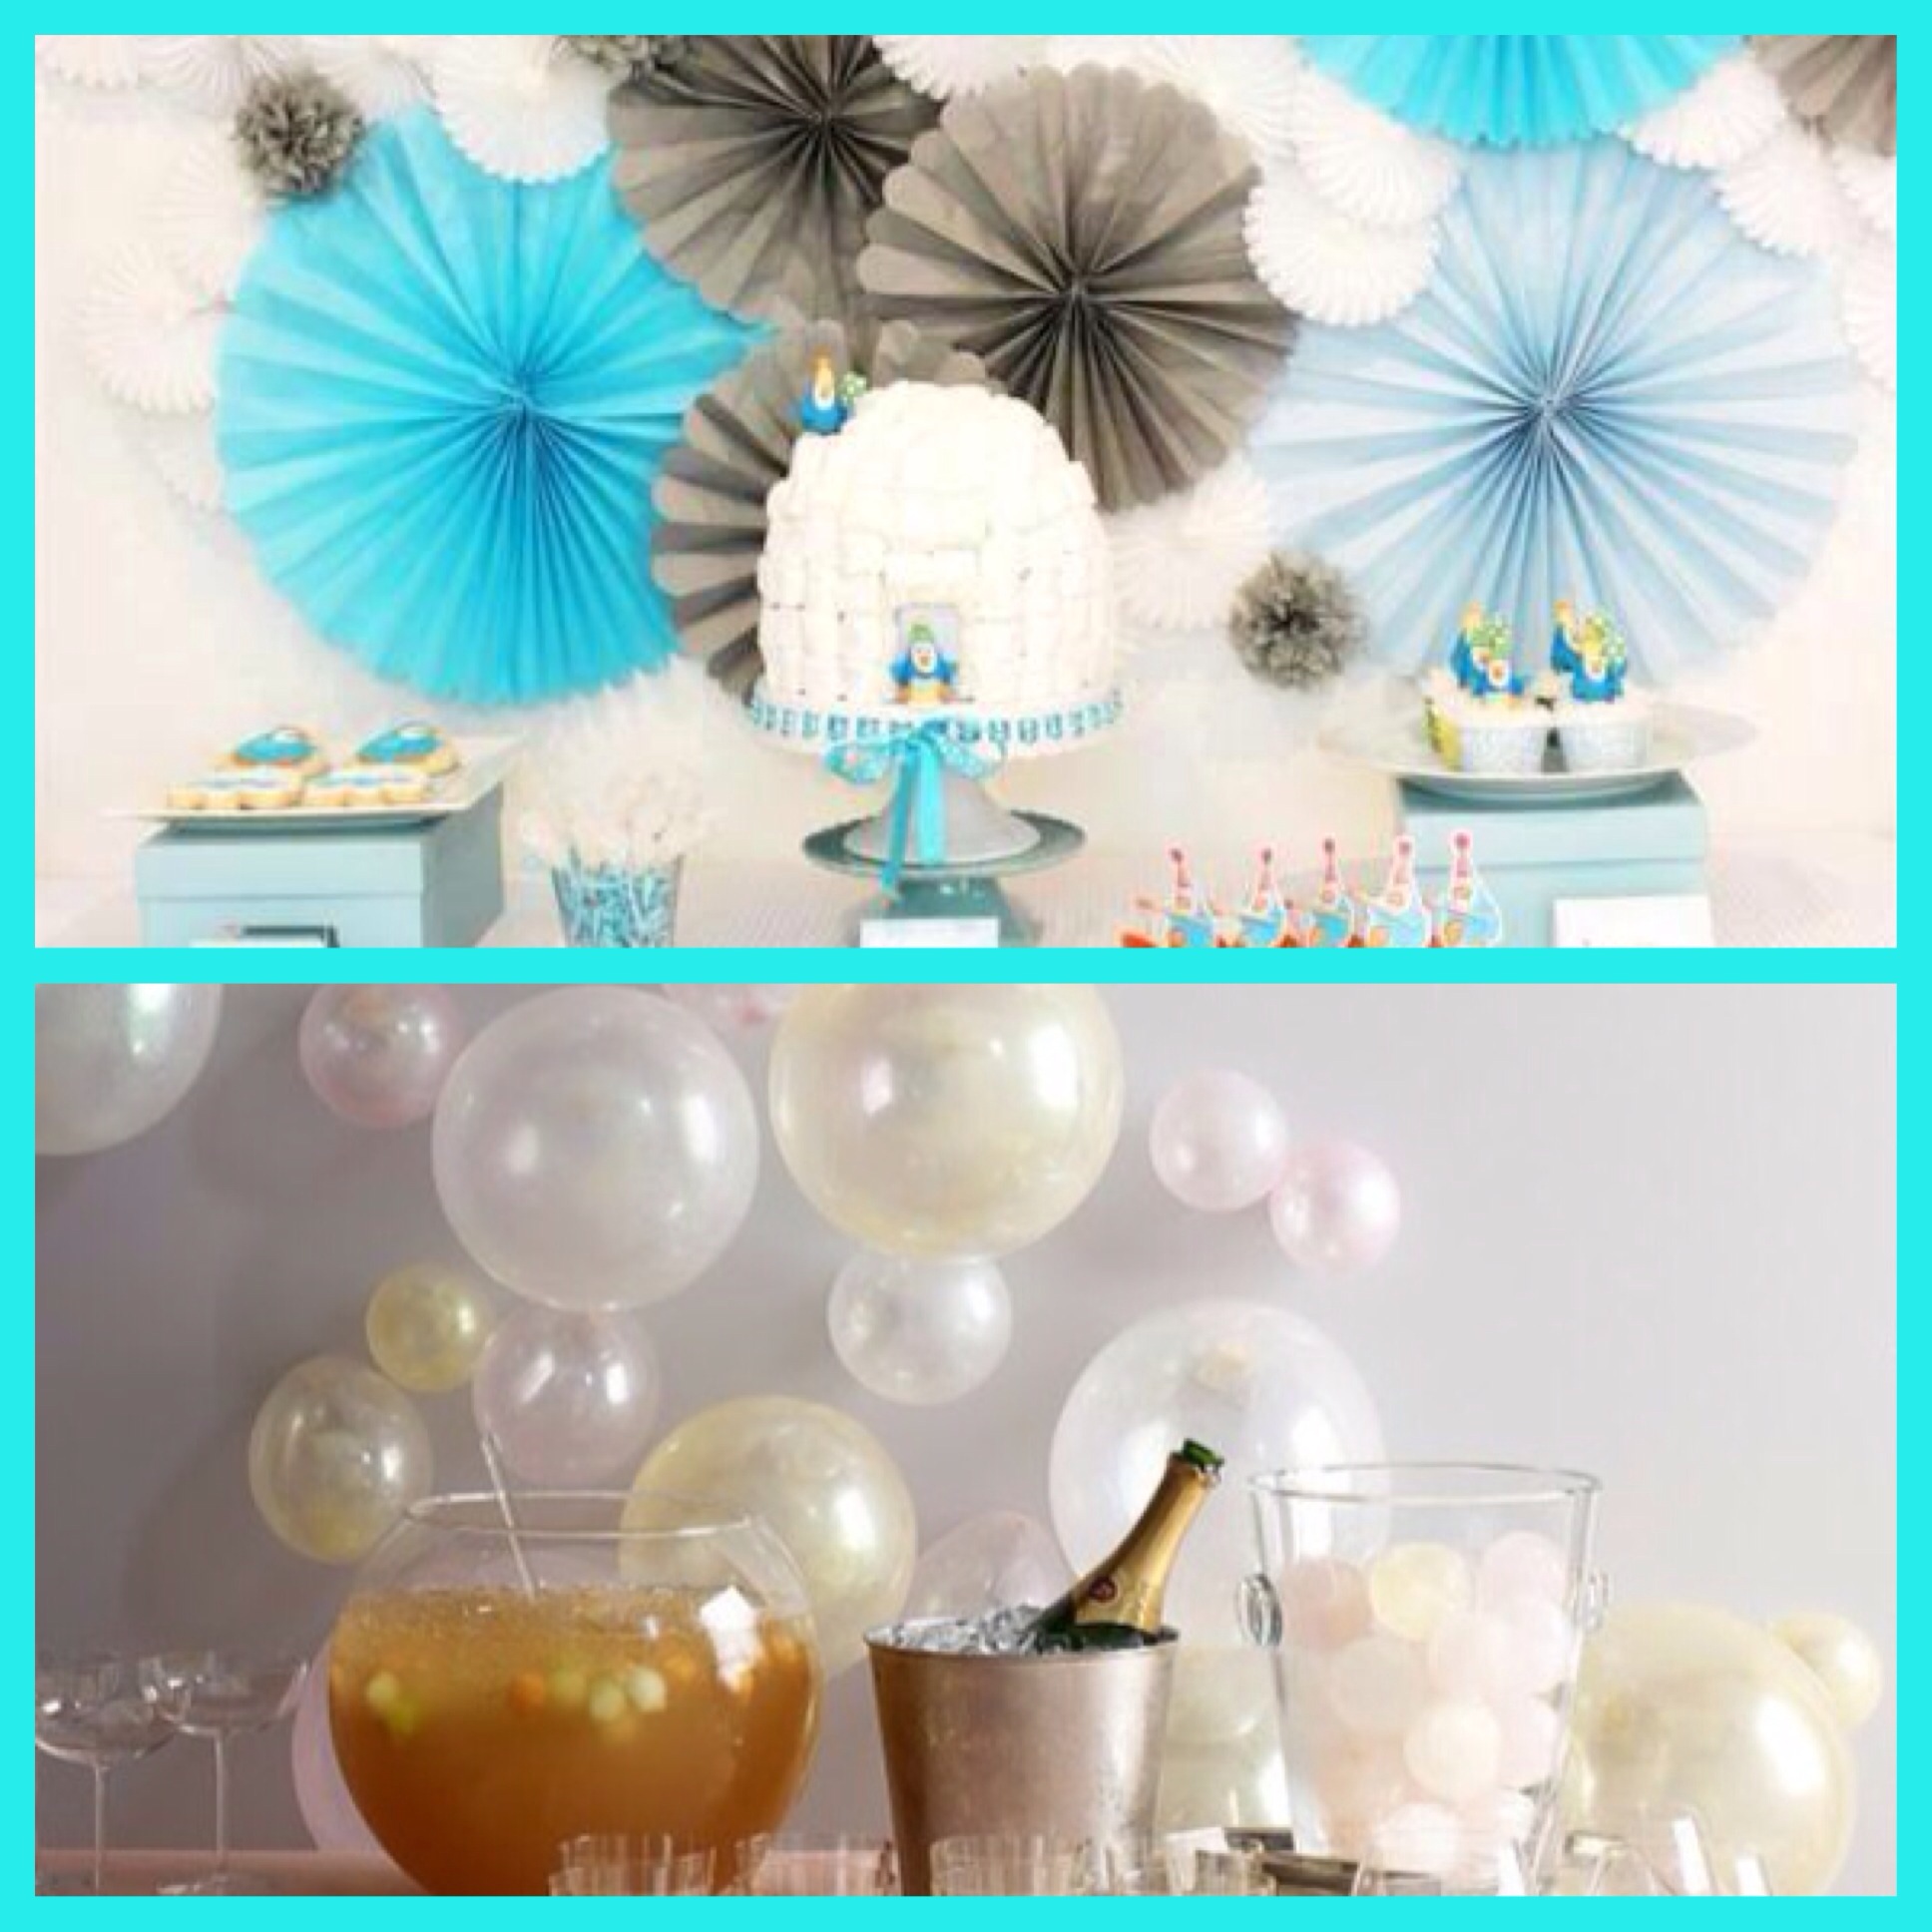 winter themed tissue paper decorations, white balloons on walls